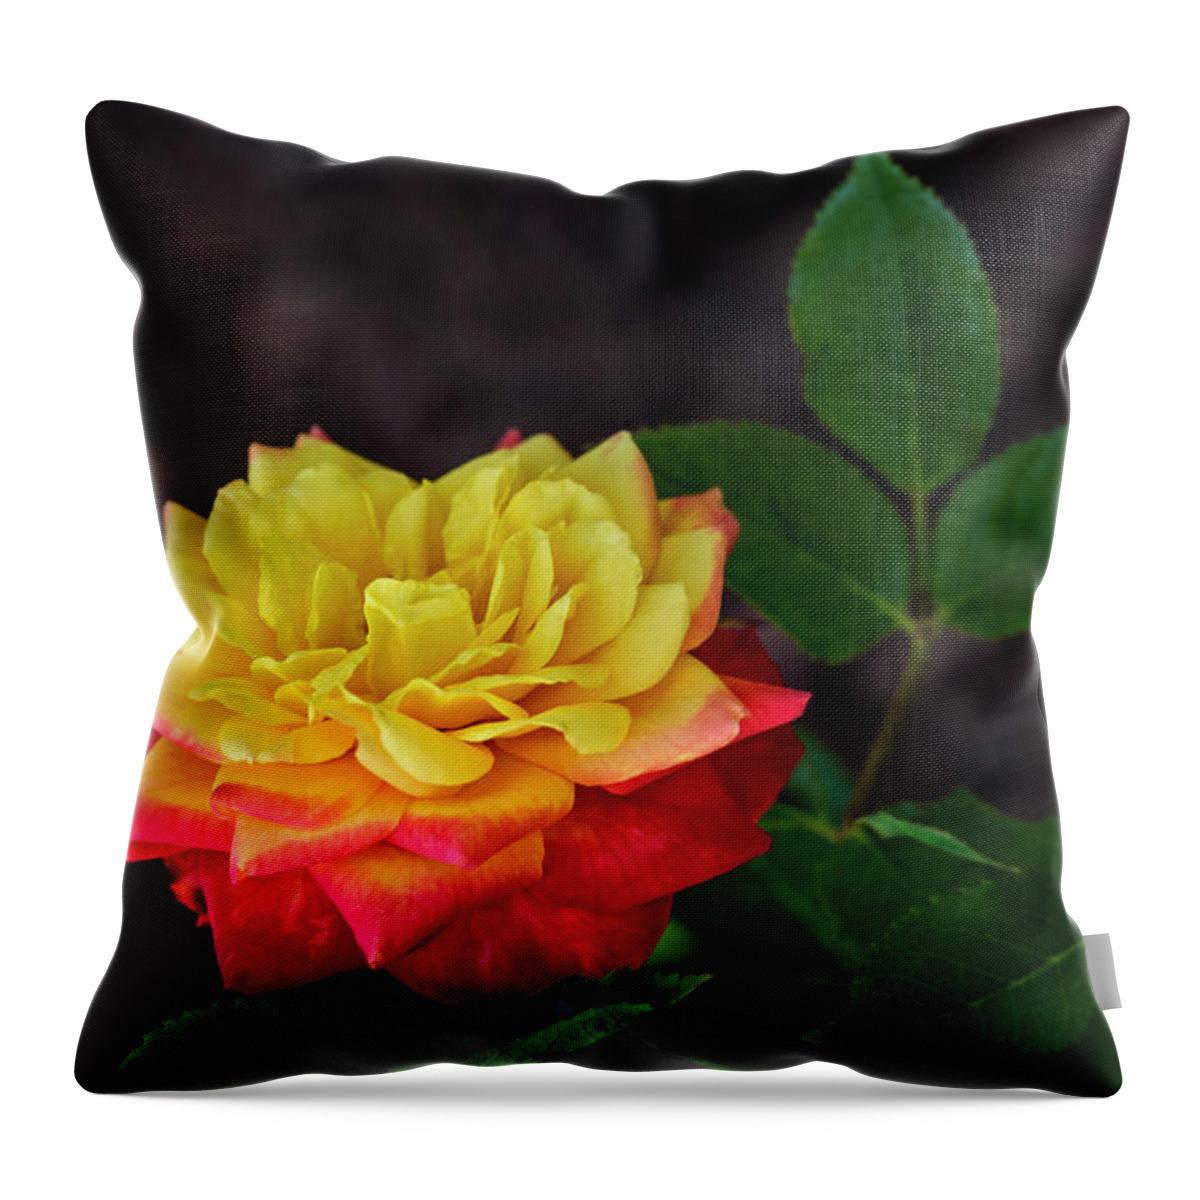 Flower Throw Pillow featuring the photograph A Rose by Michael McKenney